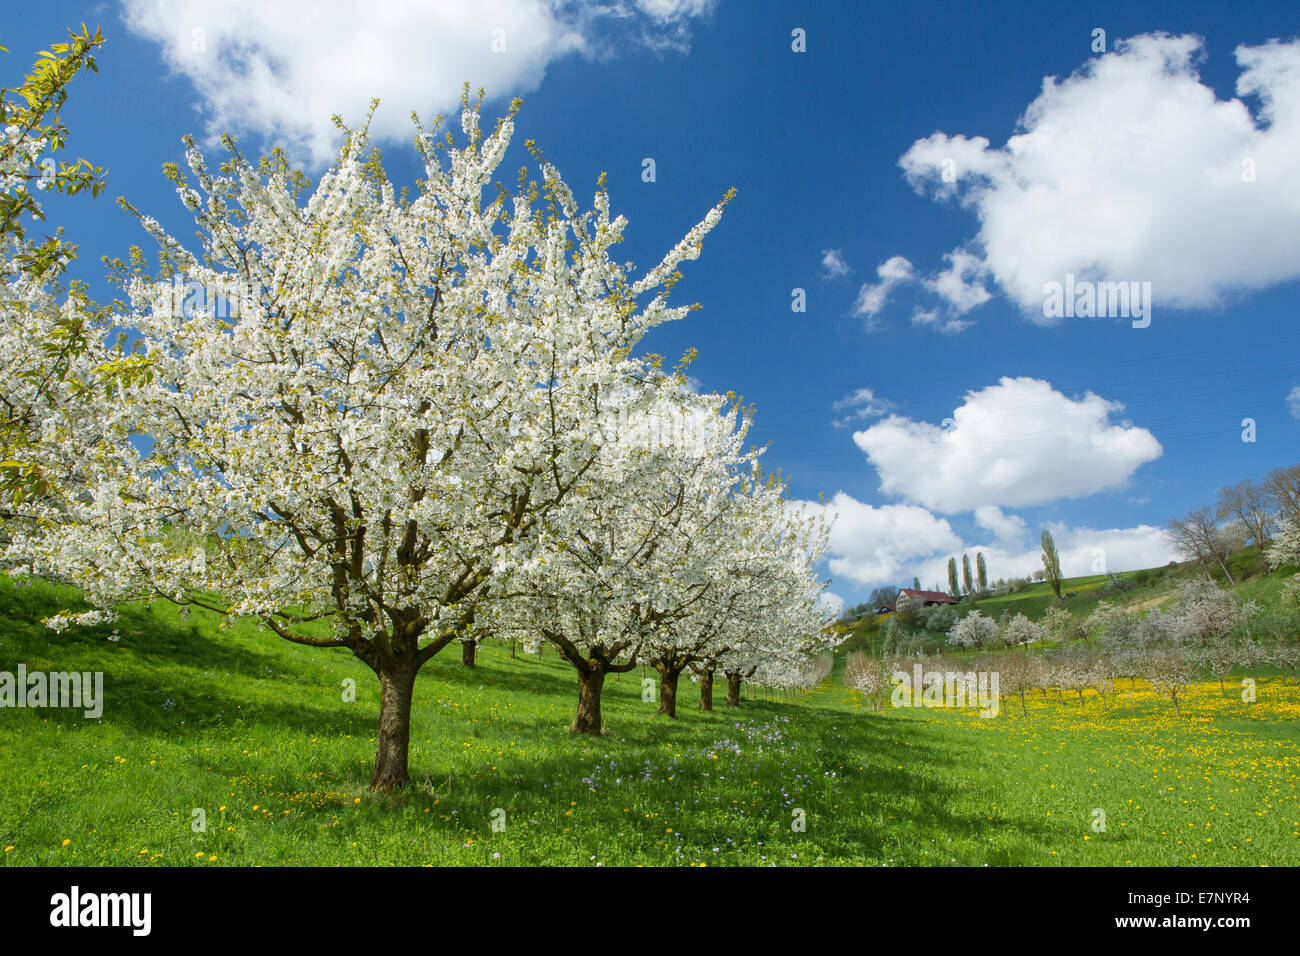 Fricktal, cherry trees, spring, canton, AG, Aargau, tree, trees, scenery, landscape, agriculture, Switzerland, Europe, Stock Photo